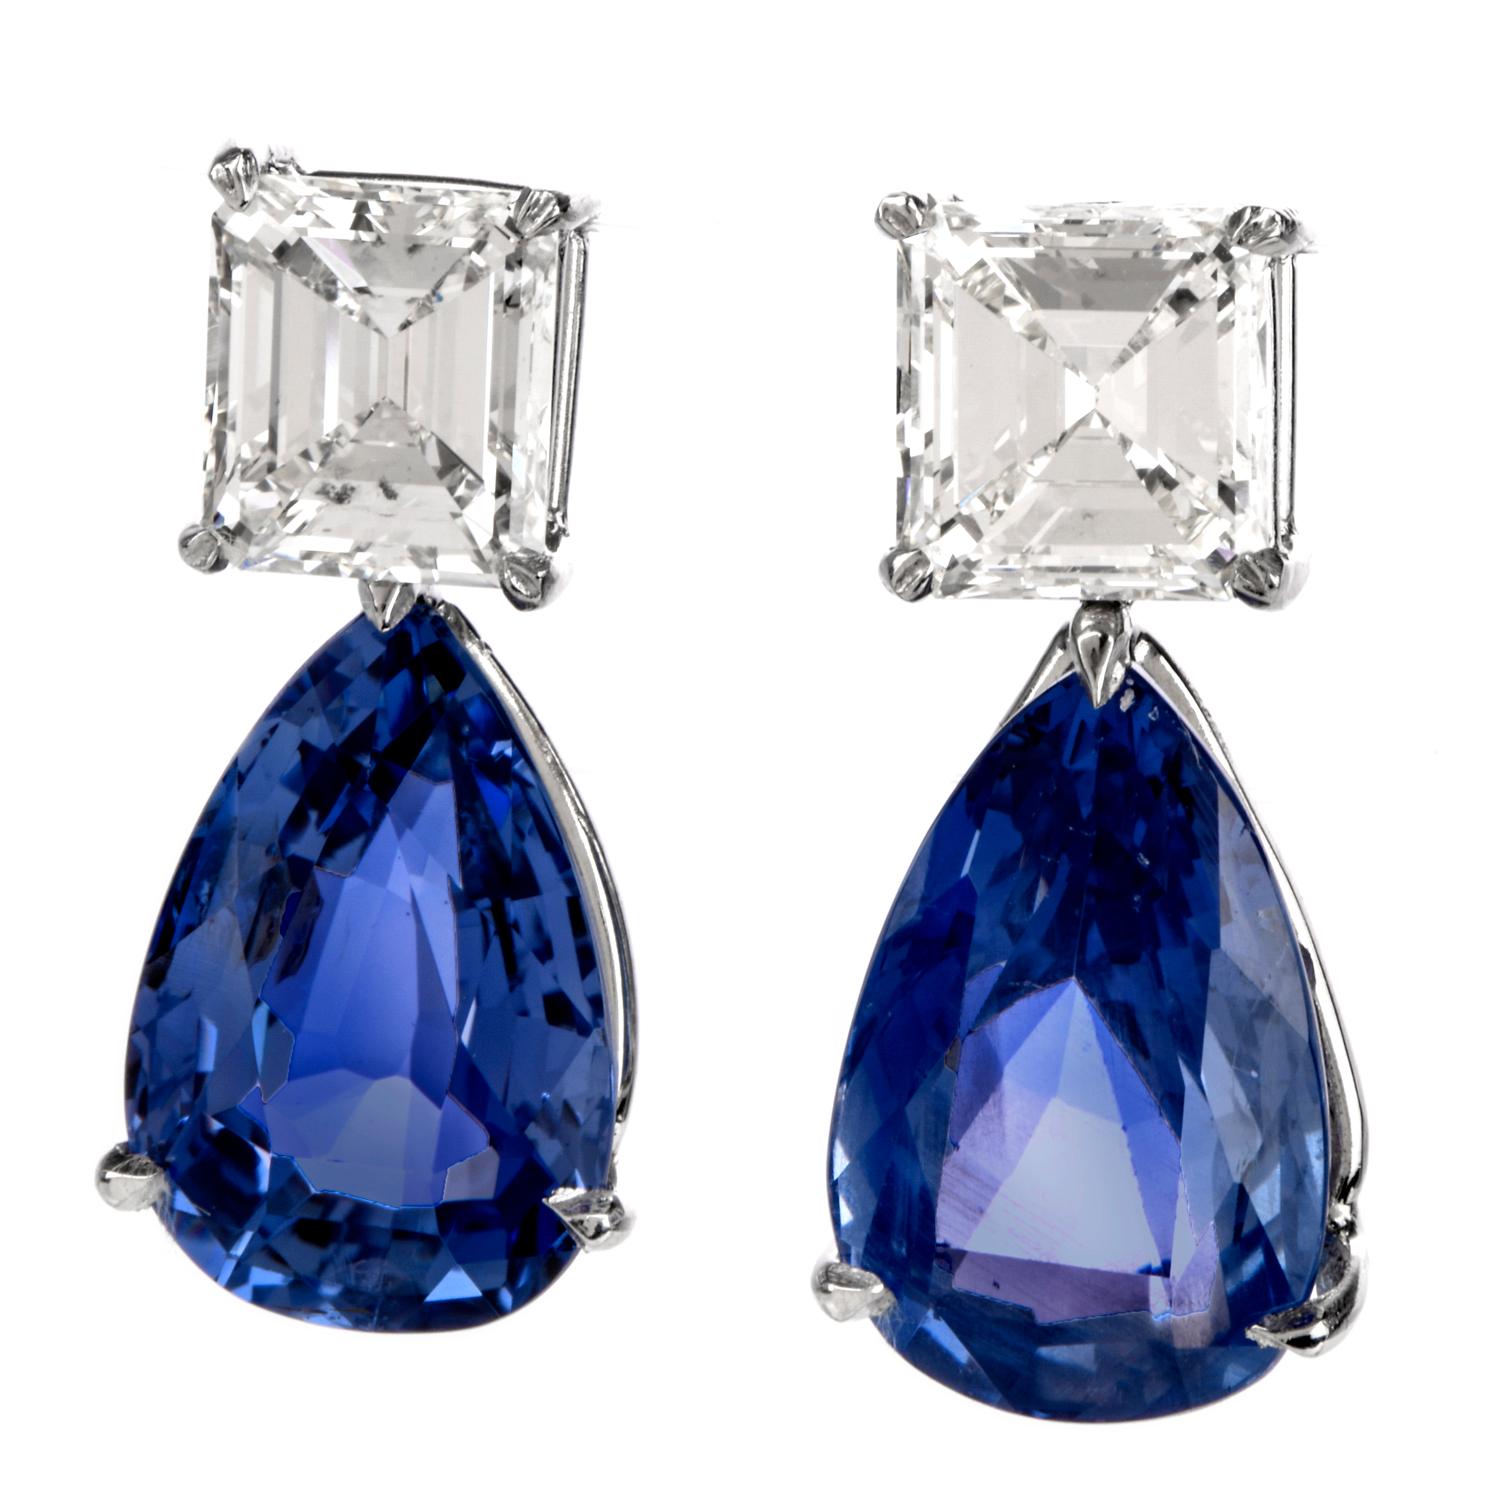 These stunning natural blue sapphire and diamond drop earrings are hand crafted in solid platinum. weighing 10 grams and measuring 24mm long x 11mm wide. Exposing a pair of prong-set, pear brilliant-cut natural corundum Sri Lanka blue sapphires,